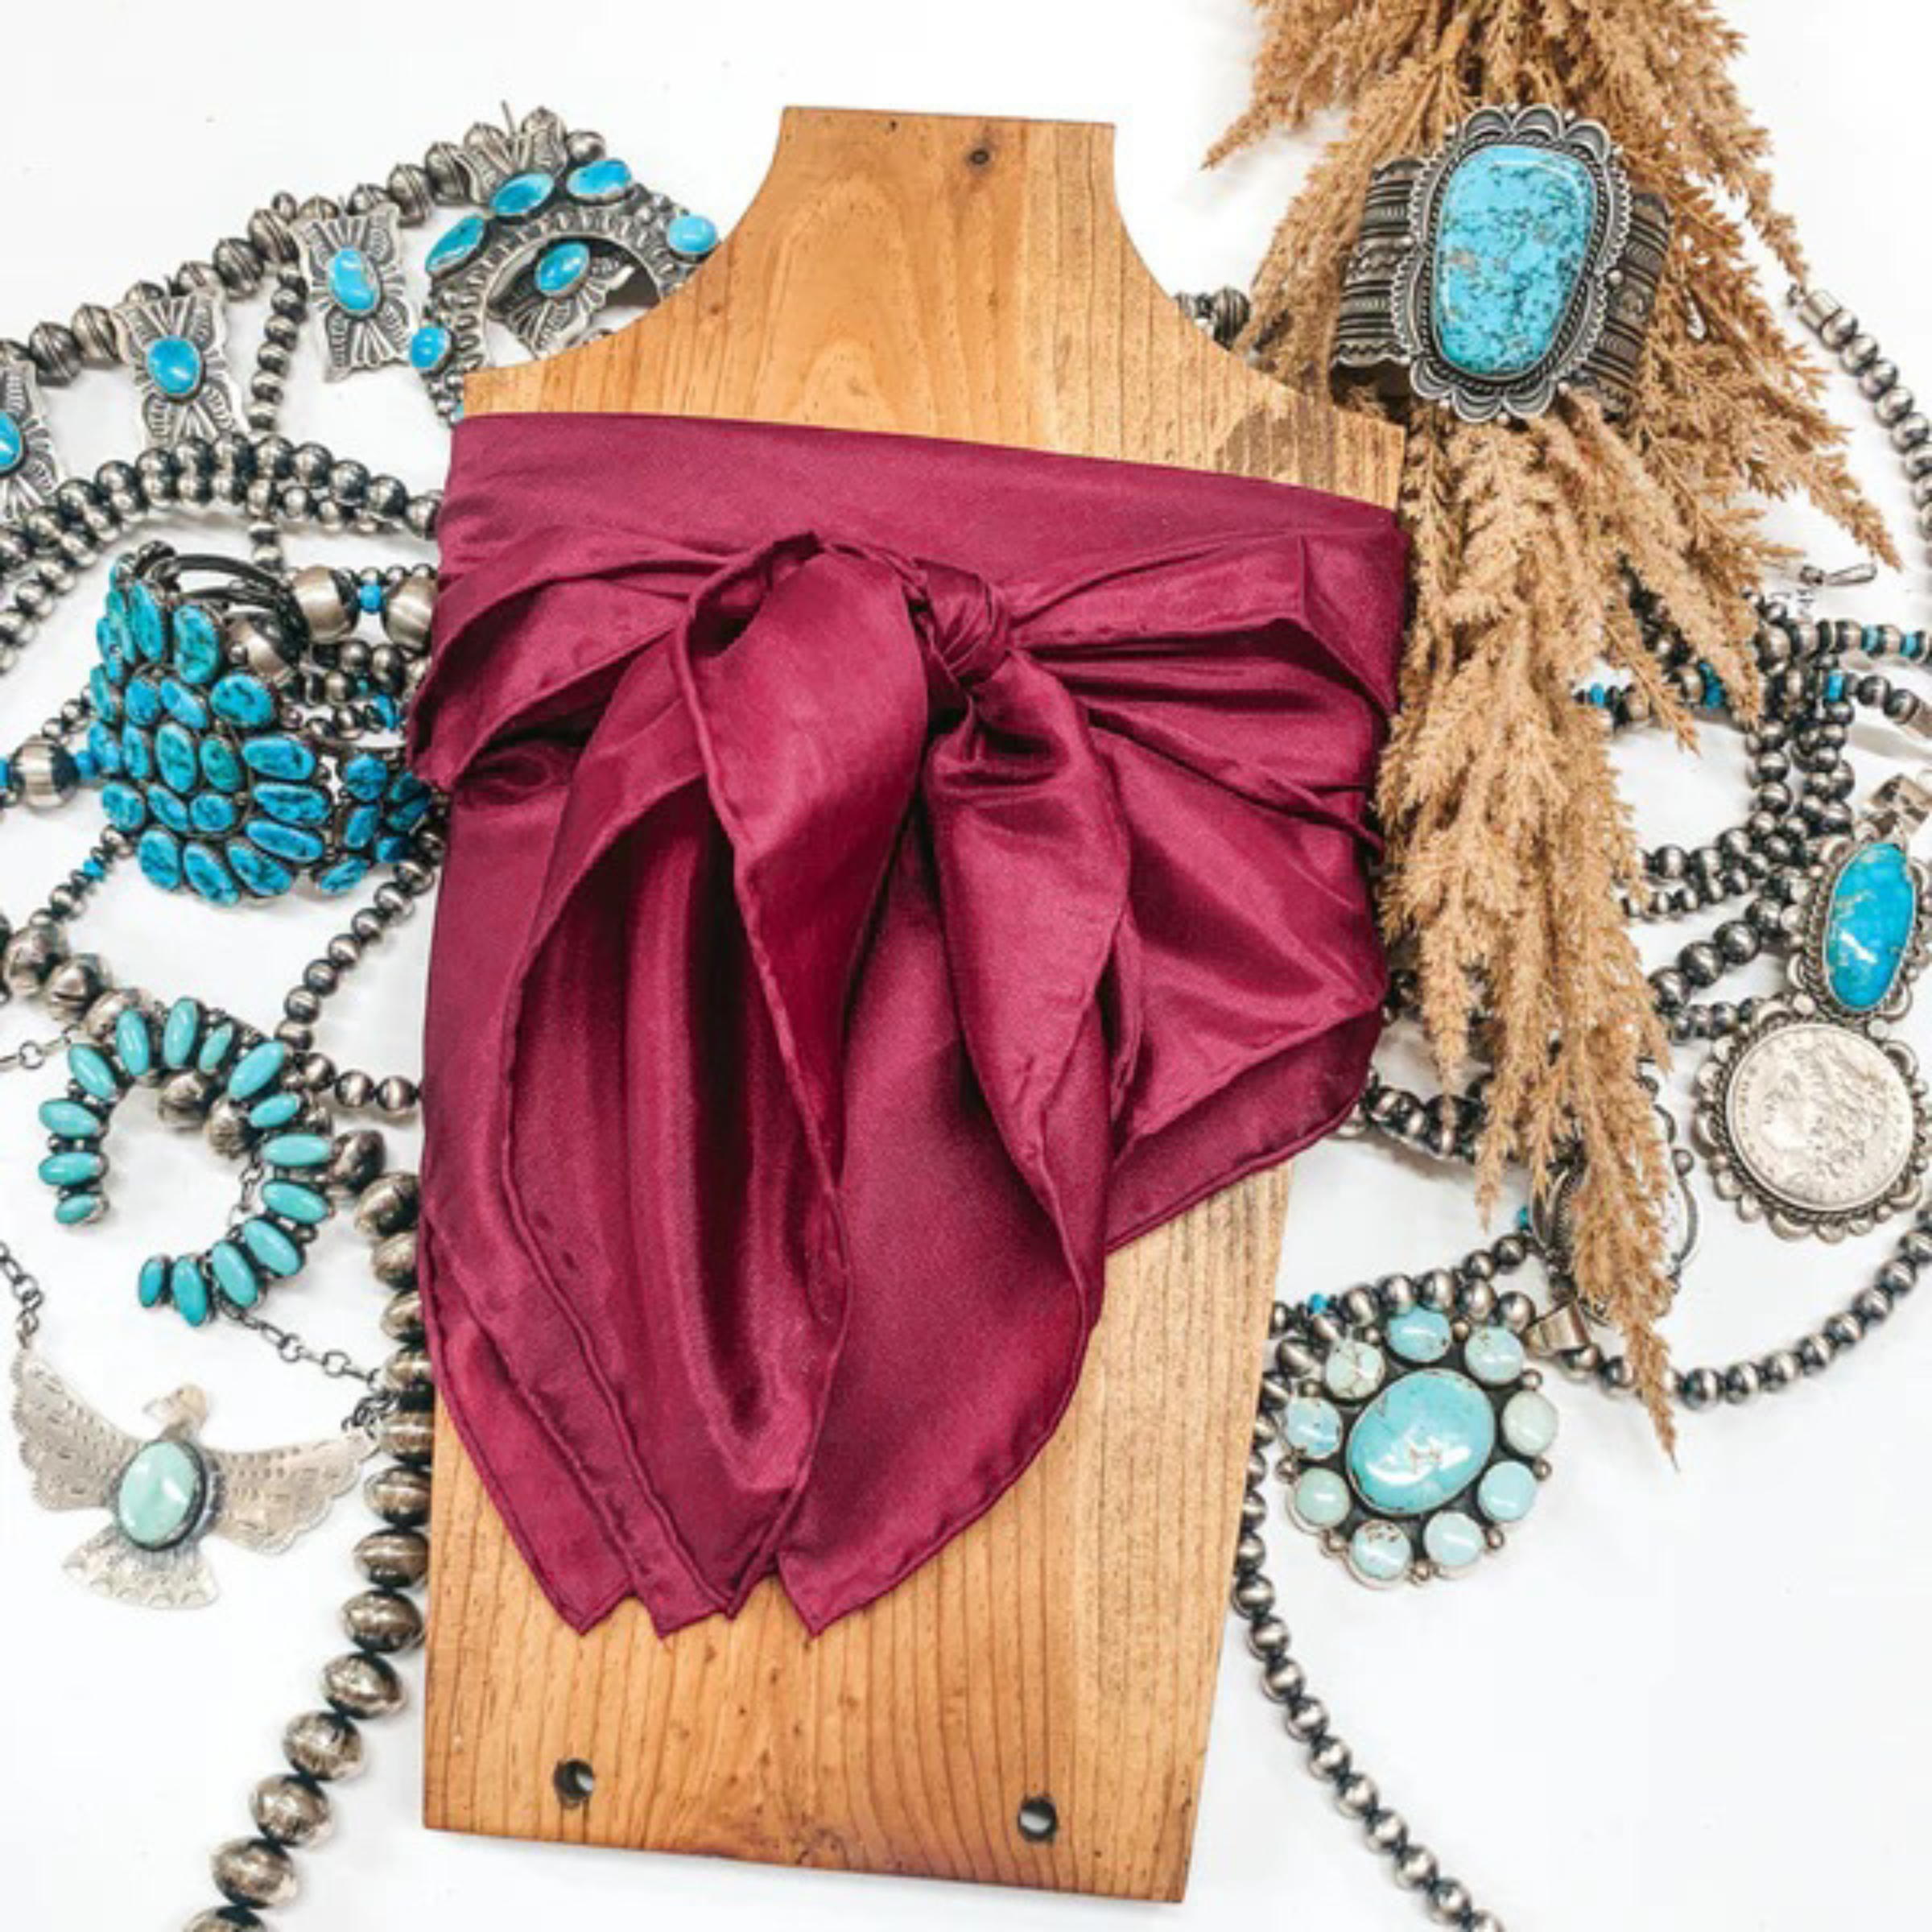 This is a maroon silk wild rag, this wild rag is pictured wrapped around a brown necklace board. This wild rag is pictured on a white background and with silver and turquoise Navajo jewelry behind it as decoration.